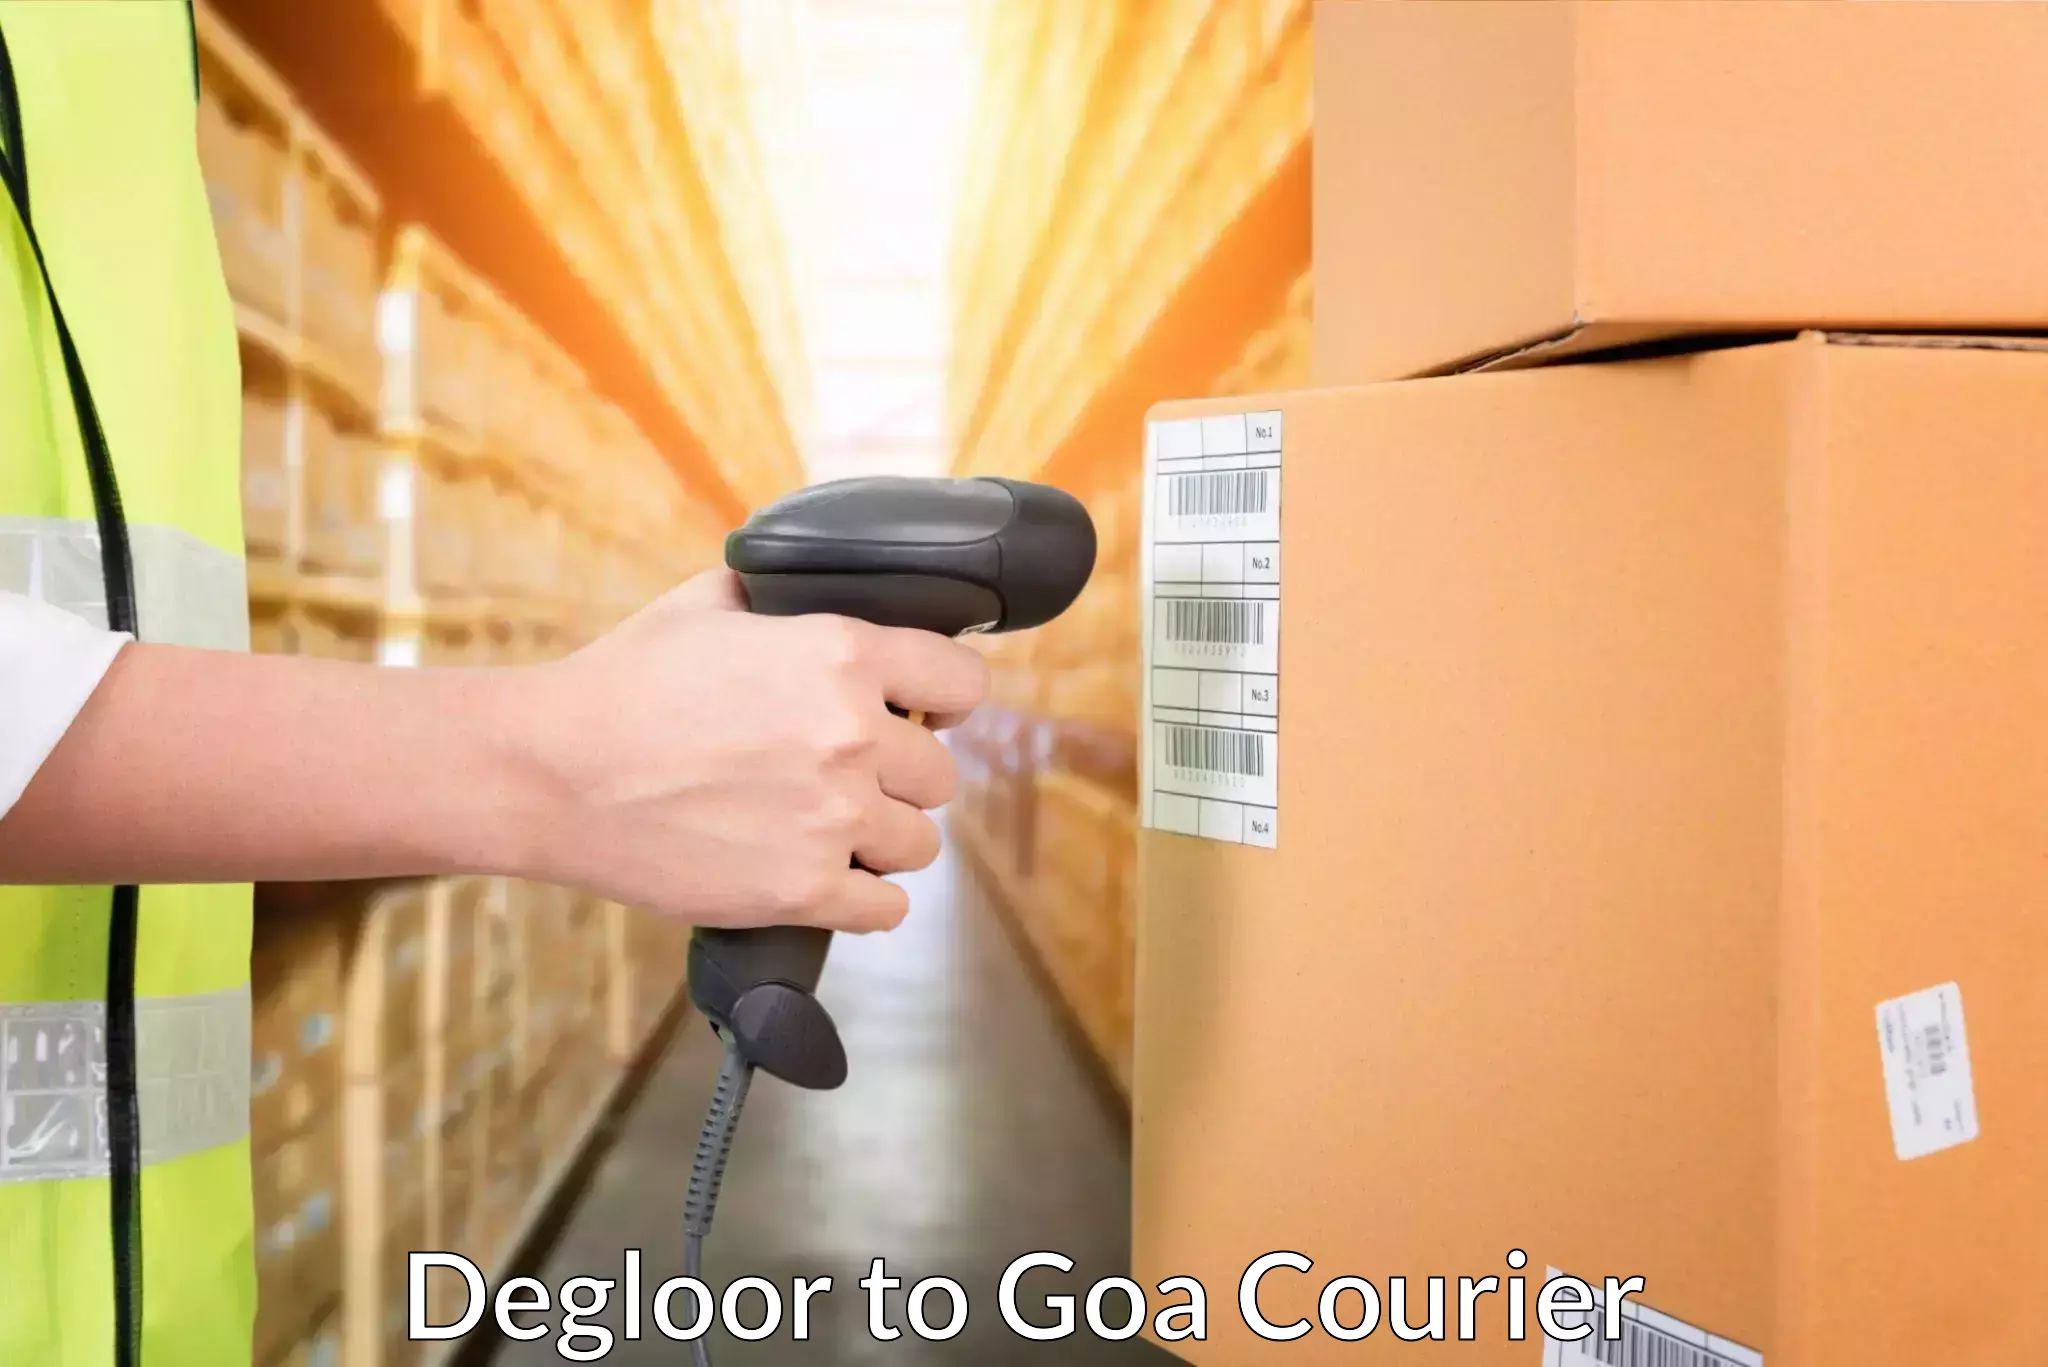 User-friendly delivery service Degloor to Goa